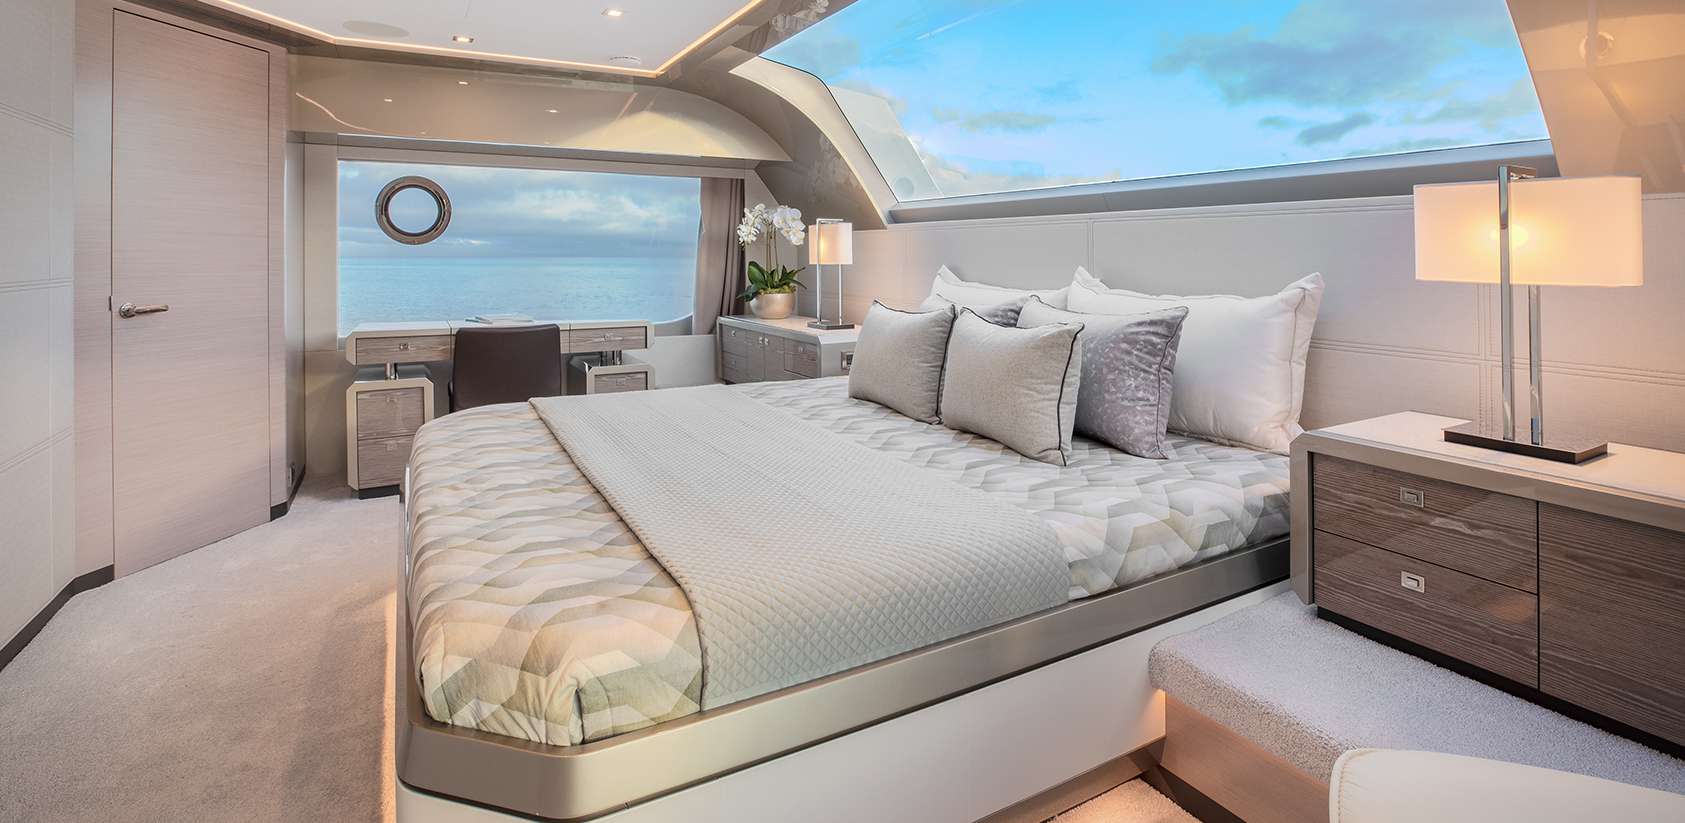 ALMOST DONE - Superyacht charter British Virgin Island & Boat hire in Caribbean, Bahamas, Florida East Coast, Cuba, Dominican Republic, Turks and Caicos, USA South East 6